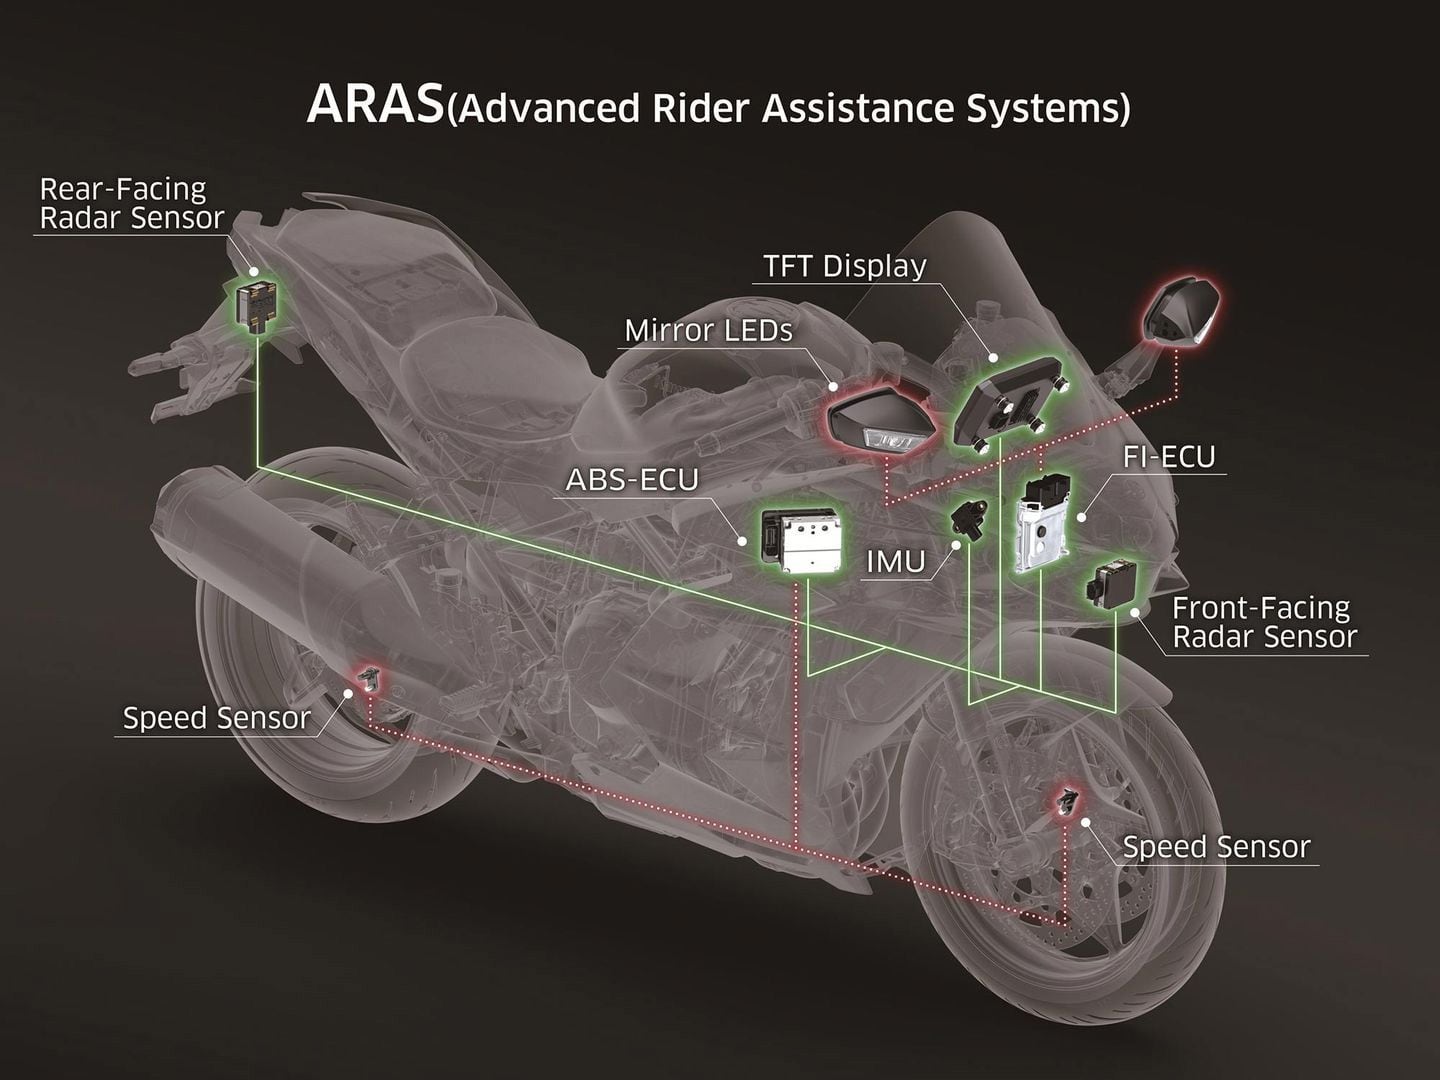 The goal is to give yet another layer of info to Kawasaki’s Advanced Rider Assistance Systems (ARAS), which already delivers adaptive cruise control, collision detection, and blind spot monitoring on the H2 SX.